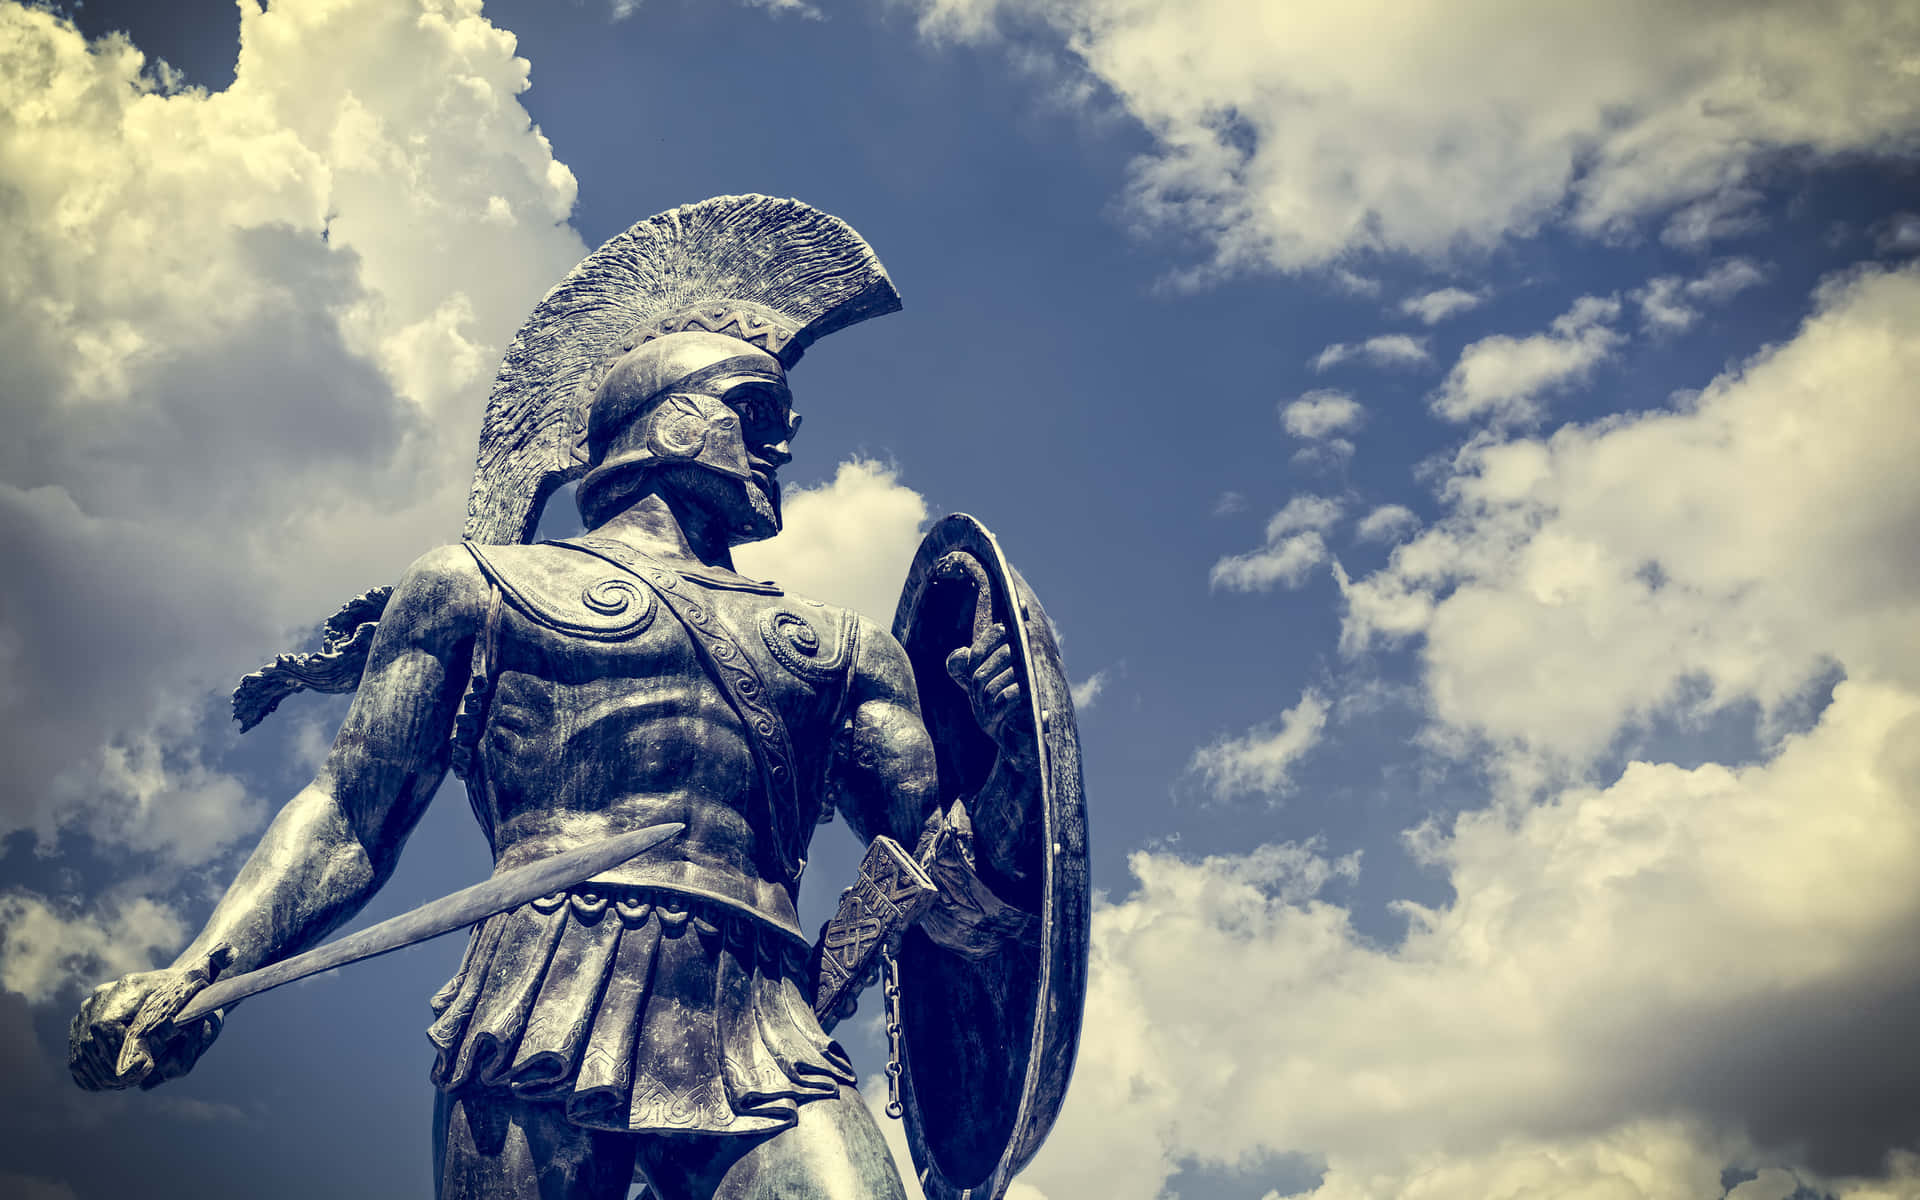 A Statue Of A Spartan Holding A Shield And Shield